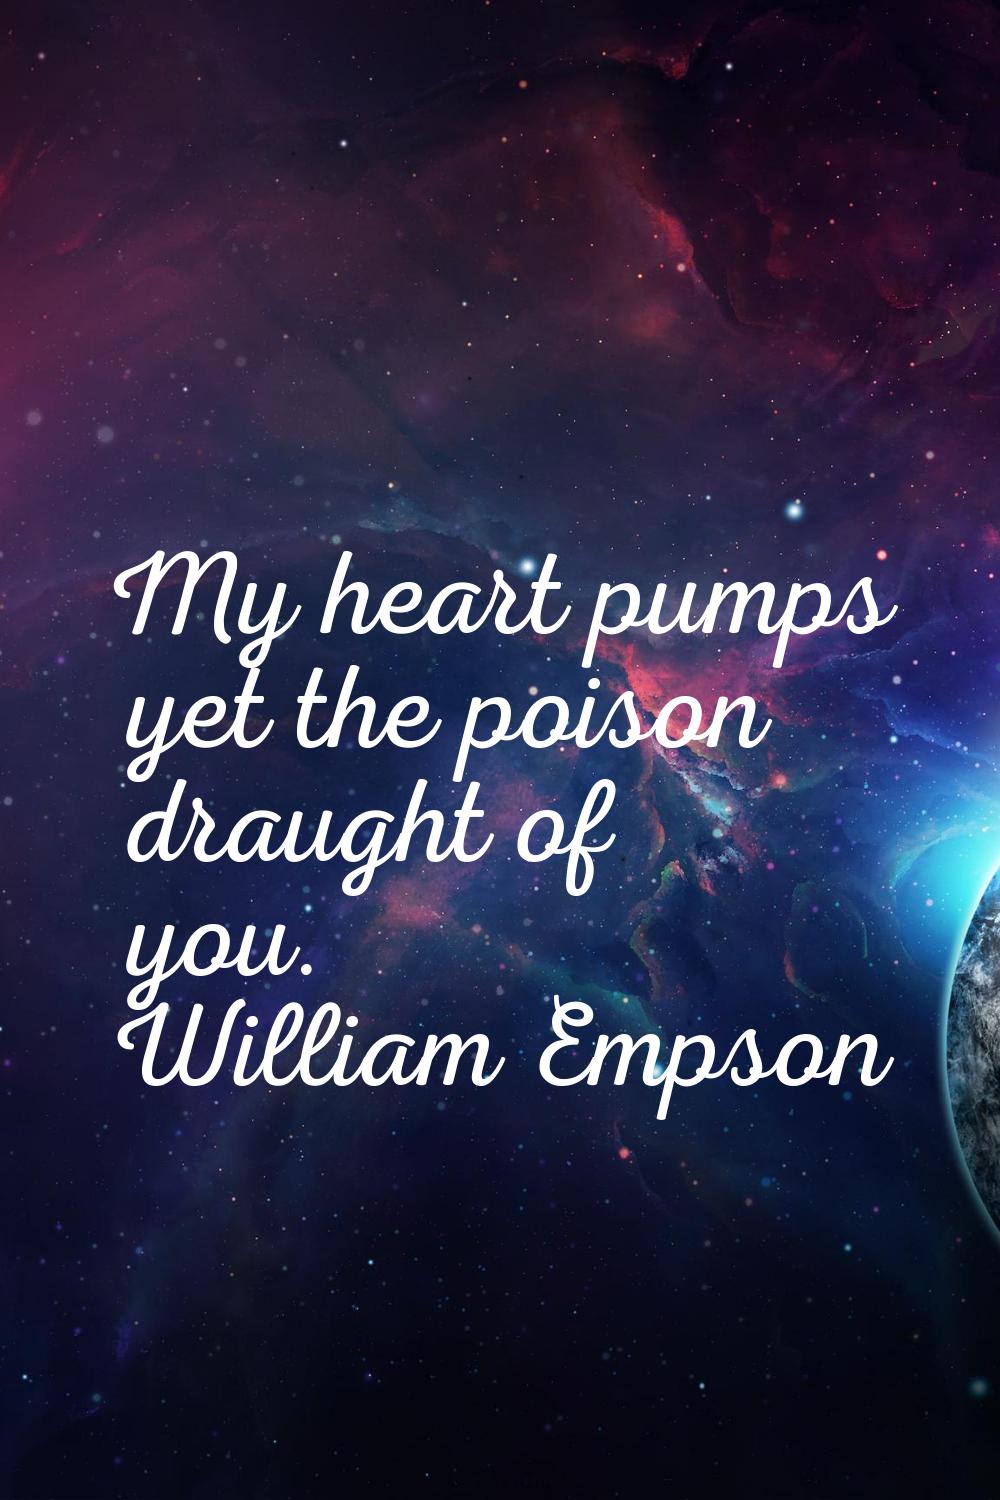 My heart pumps yet the poison draught of you.